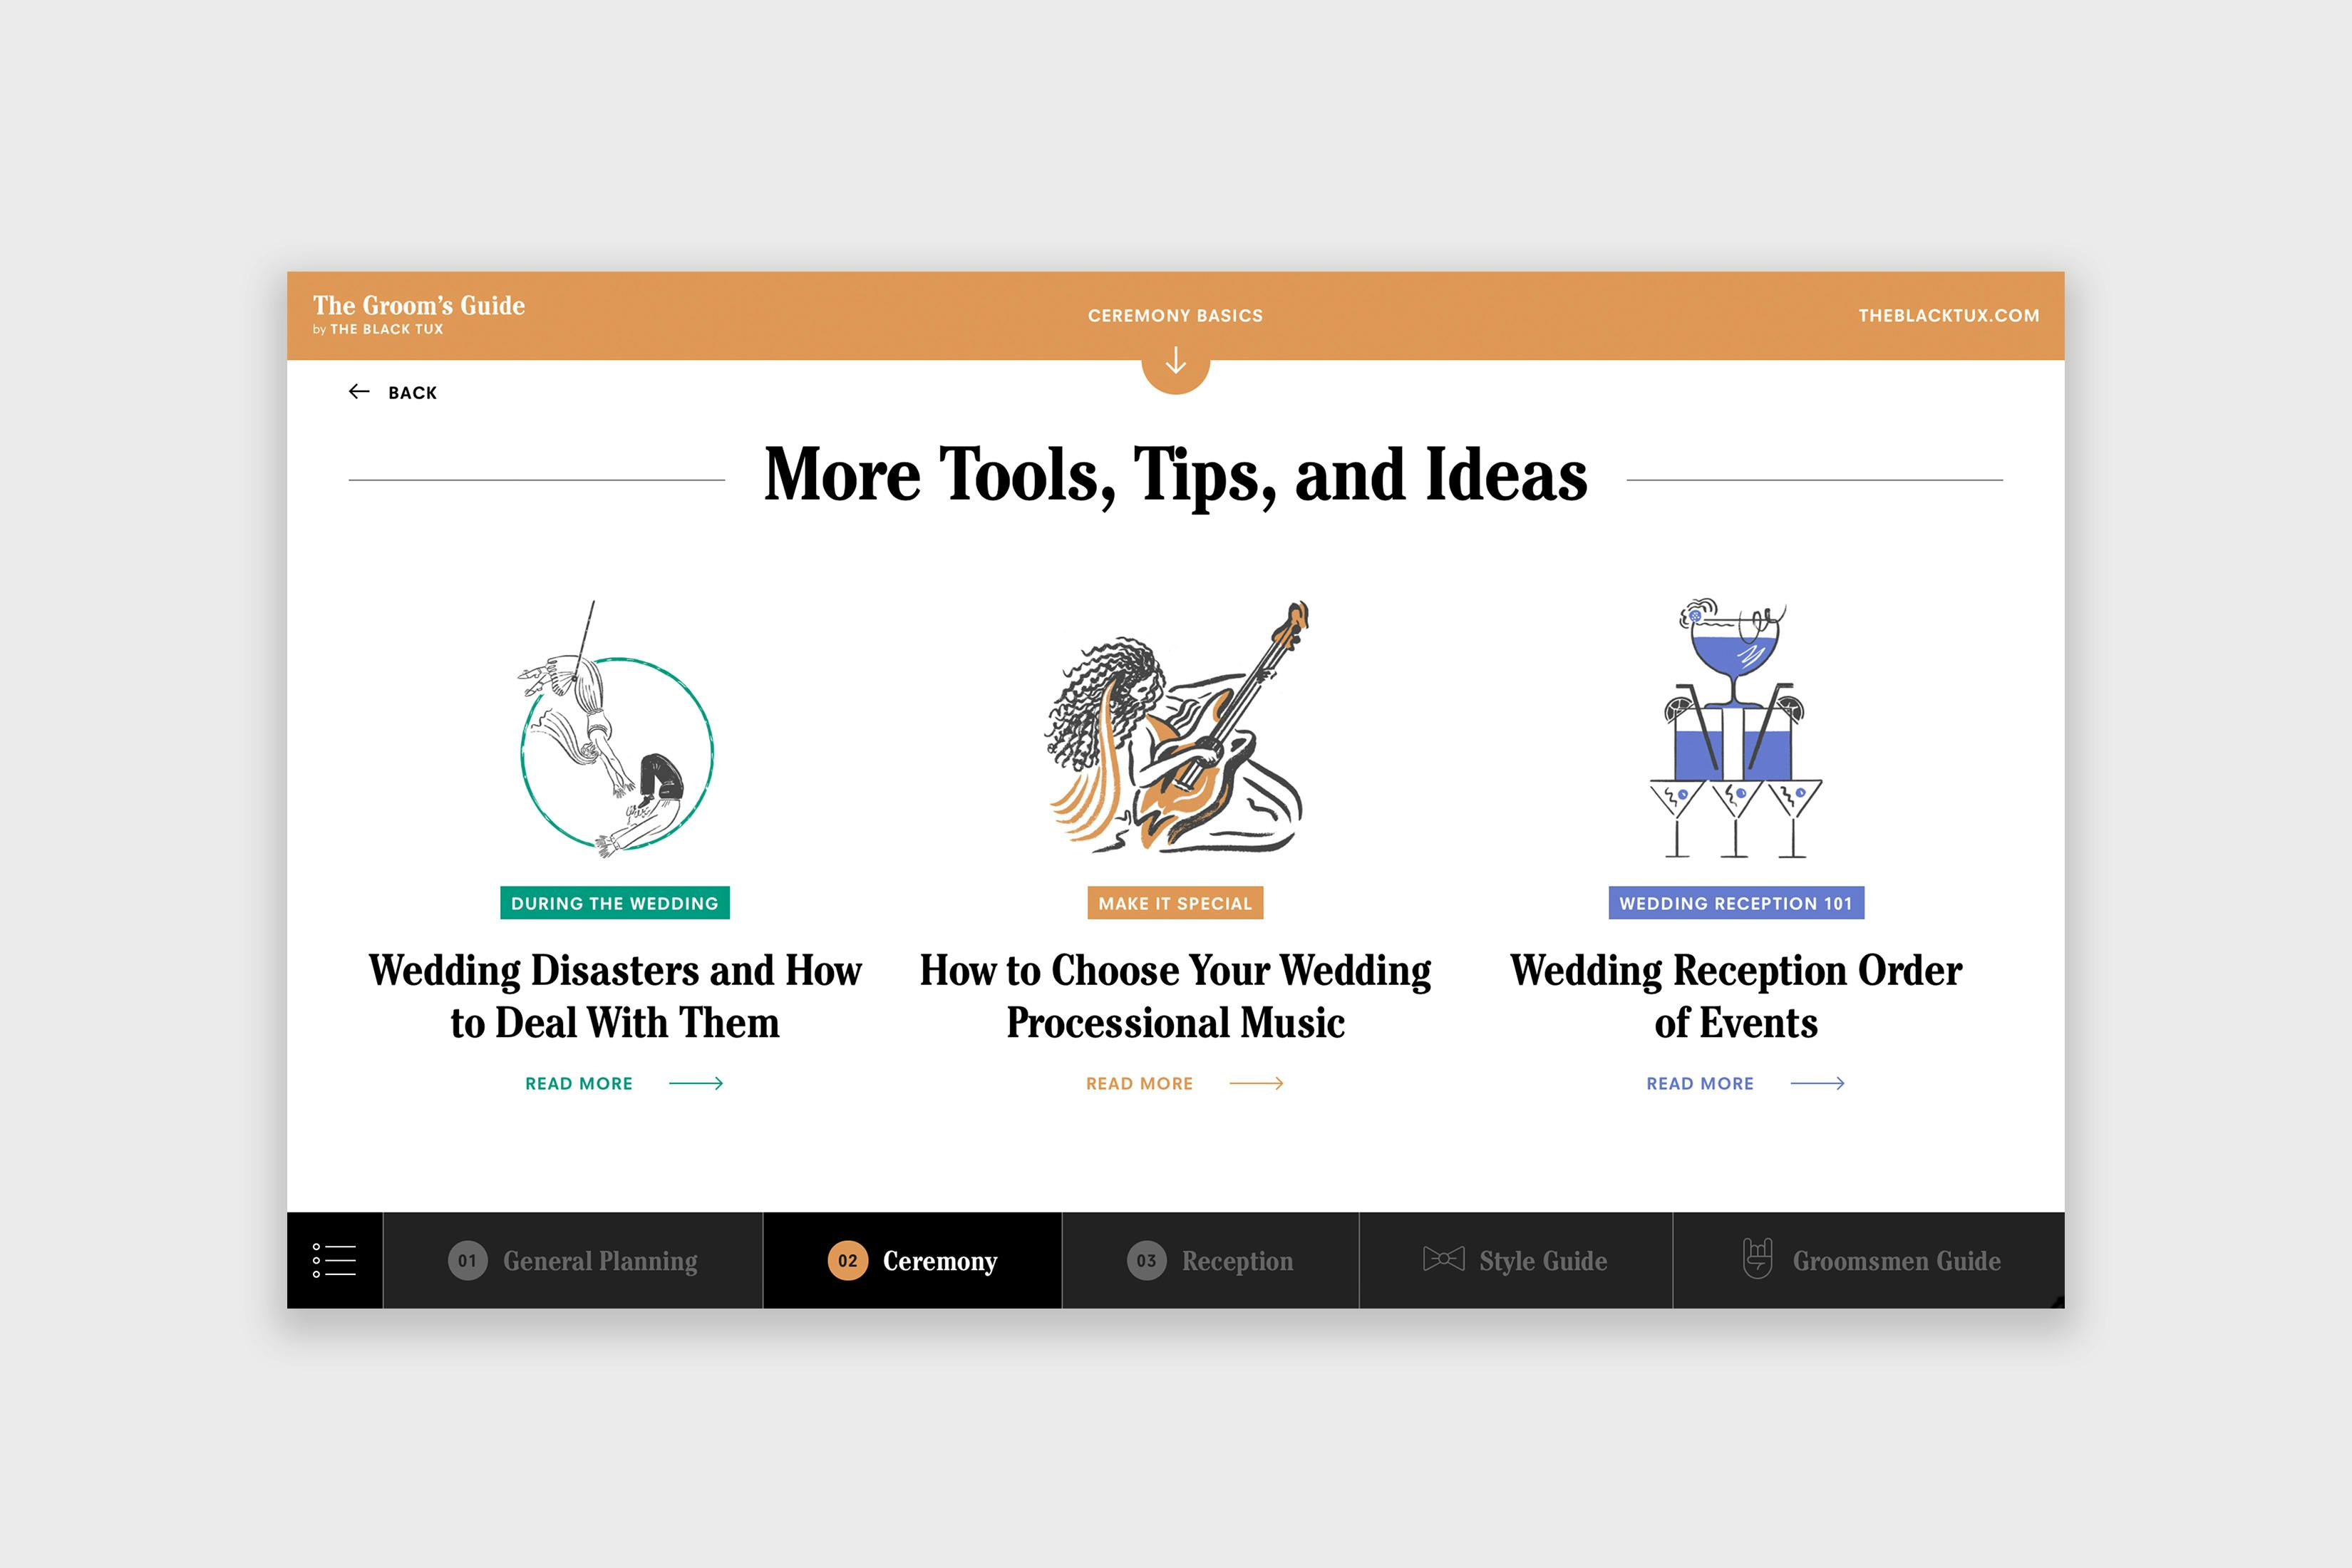 More Tools, Tips, and Ideas page